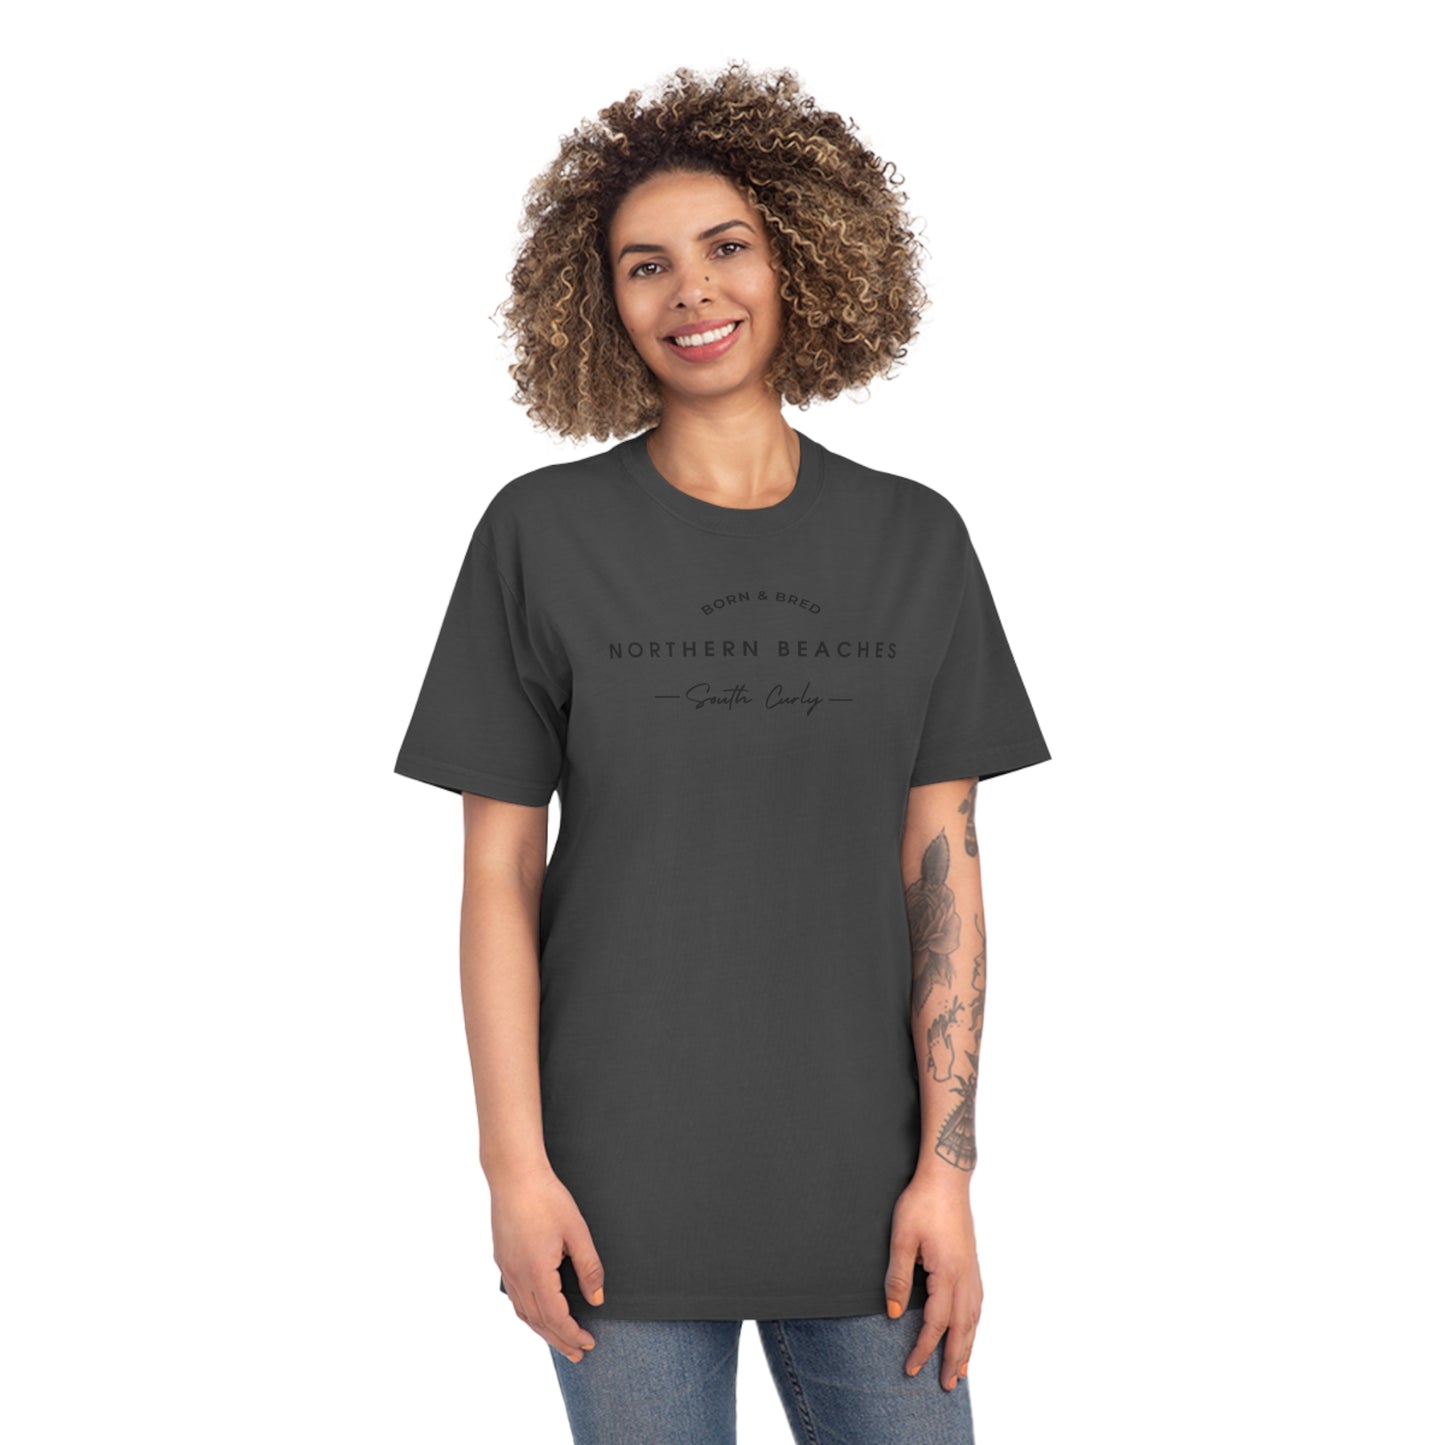 Northern Beaches Sth Curly bnb AS Colour 100% Cotton Unisex Faded Shirt